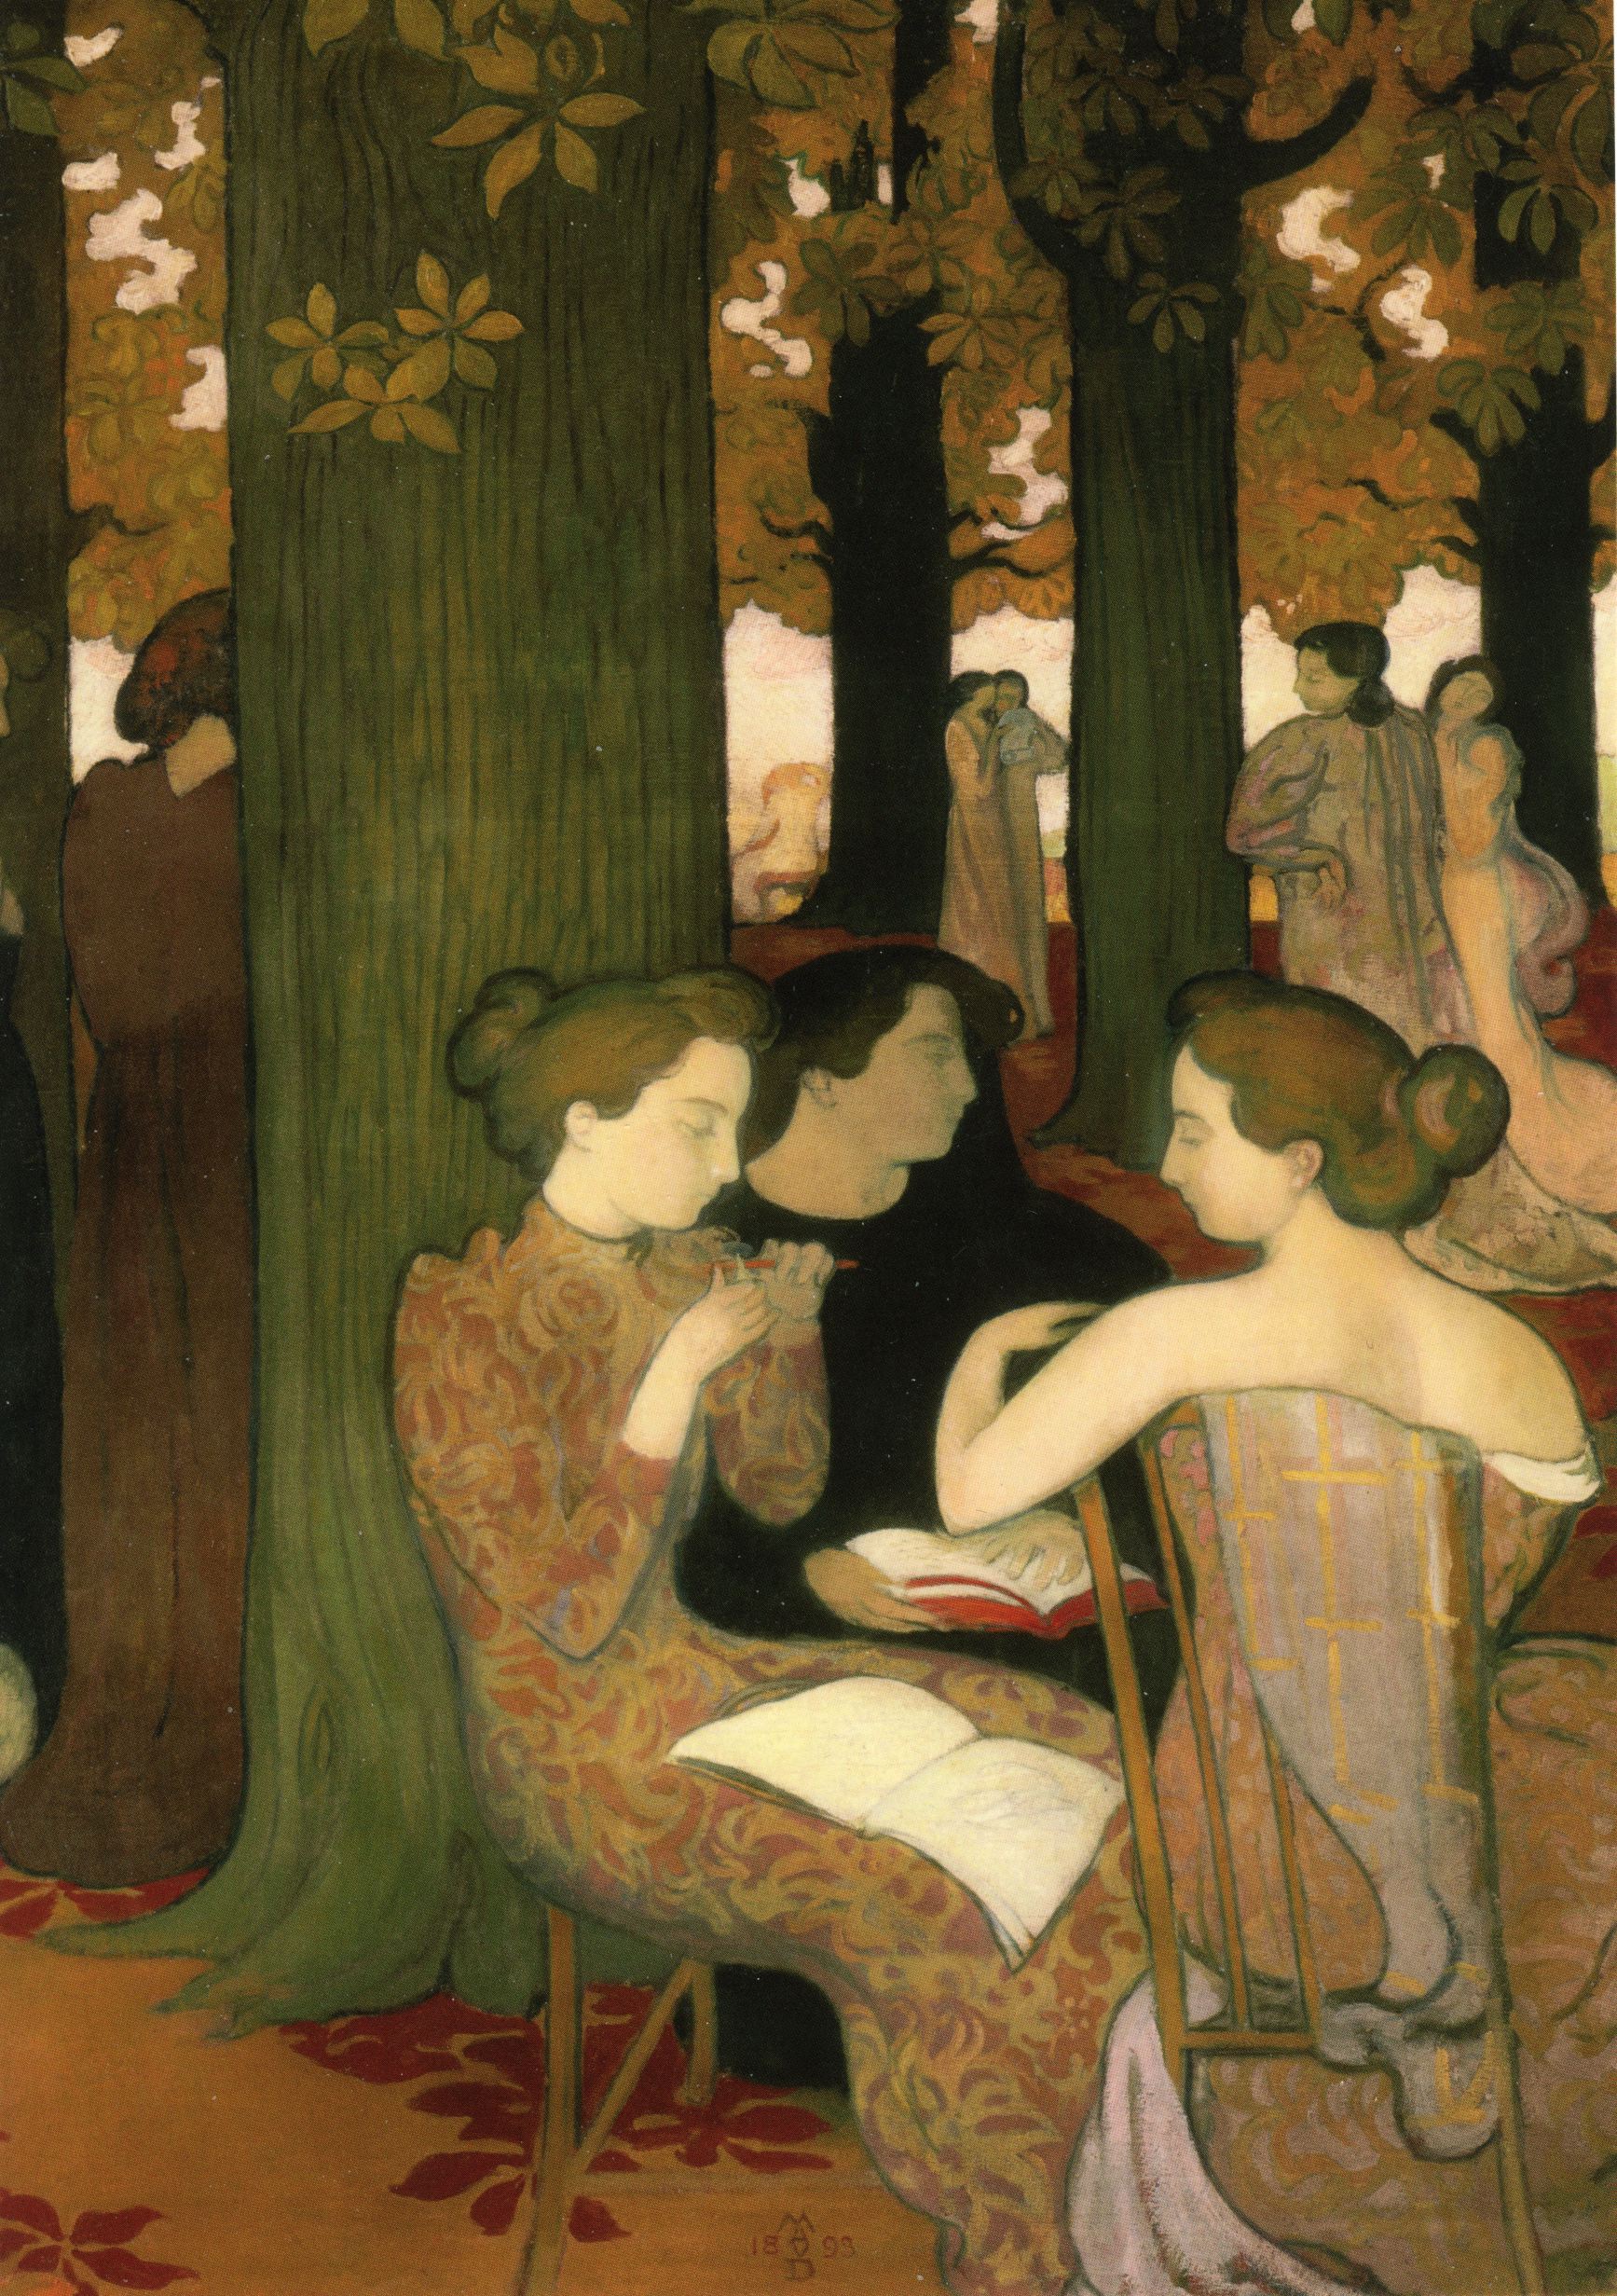 Musas by Maurice Denis - 1893 Musée d'Orsay